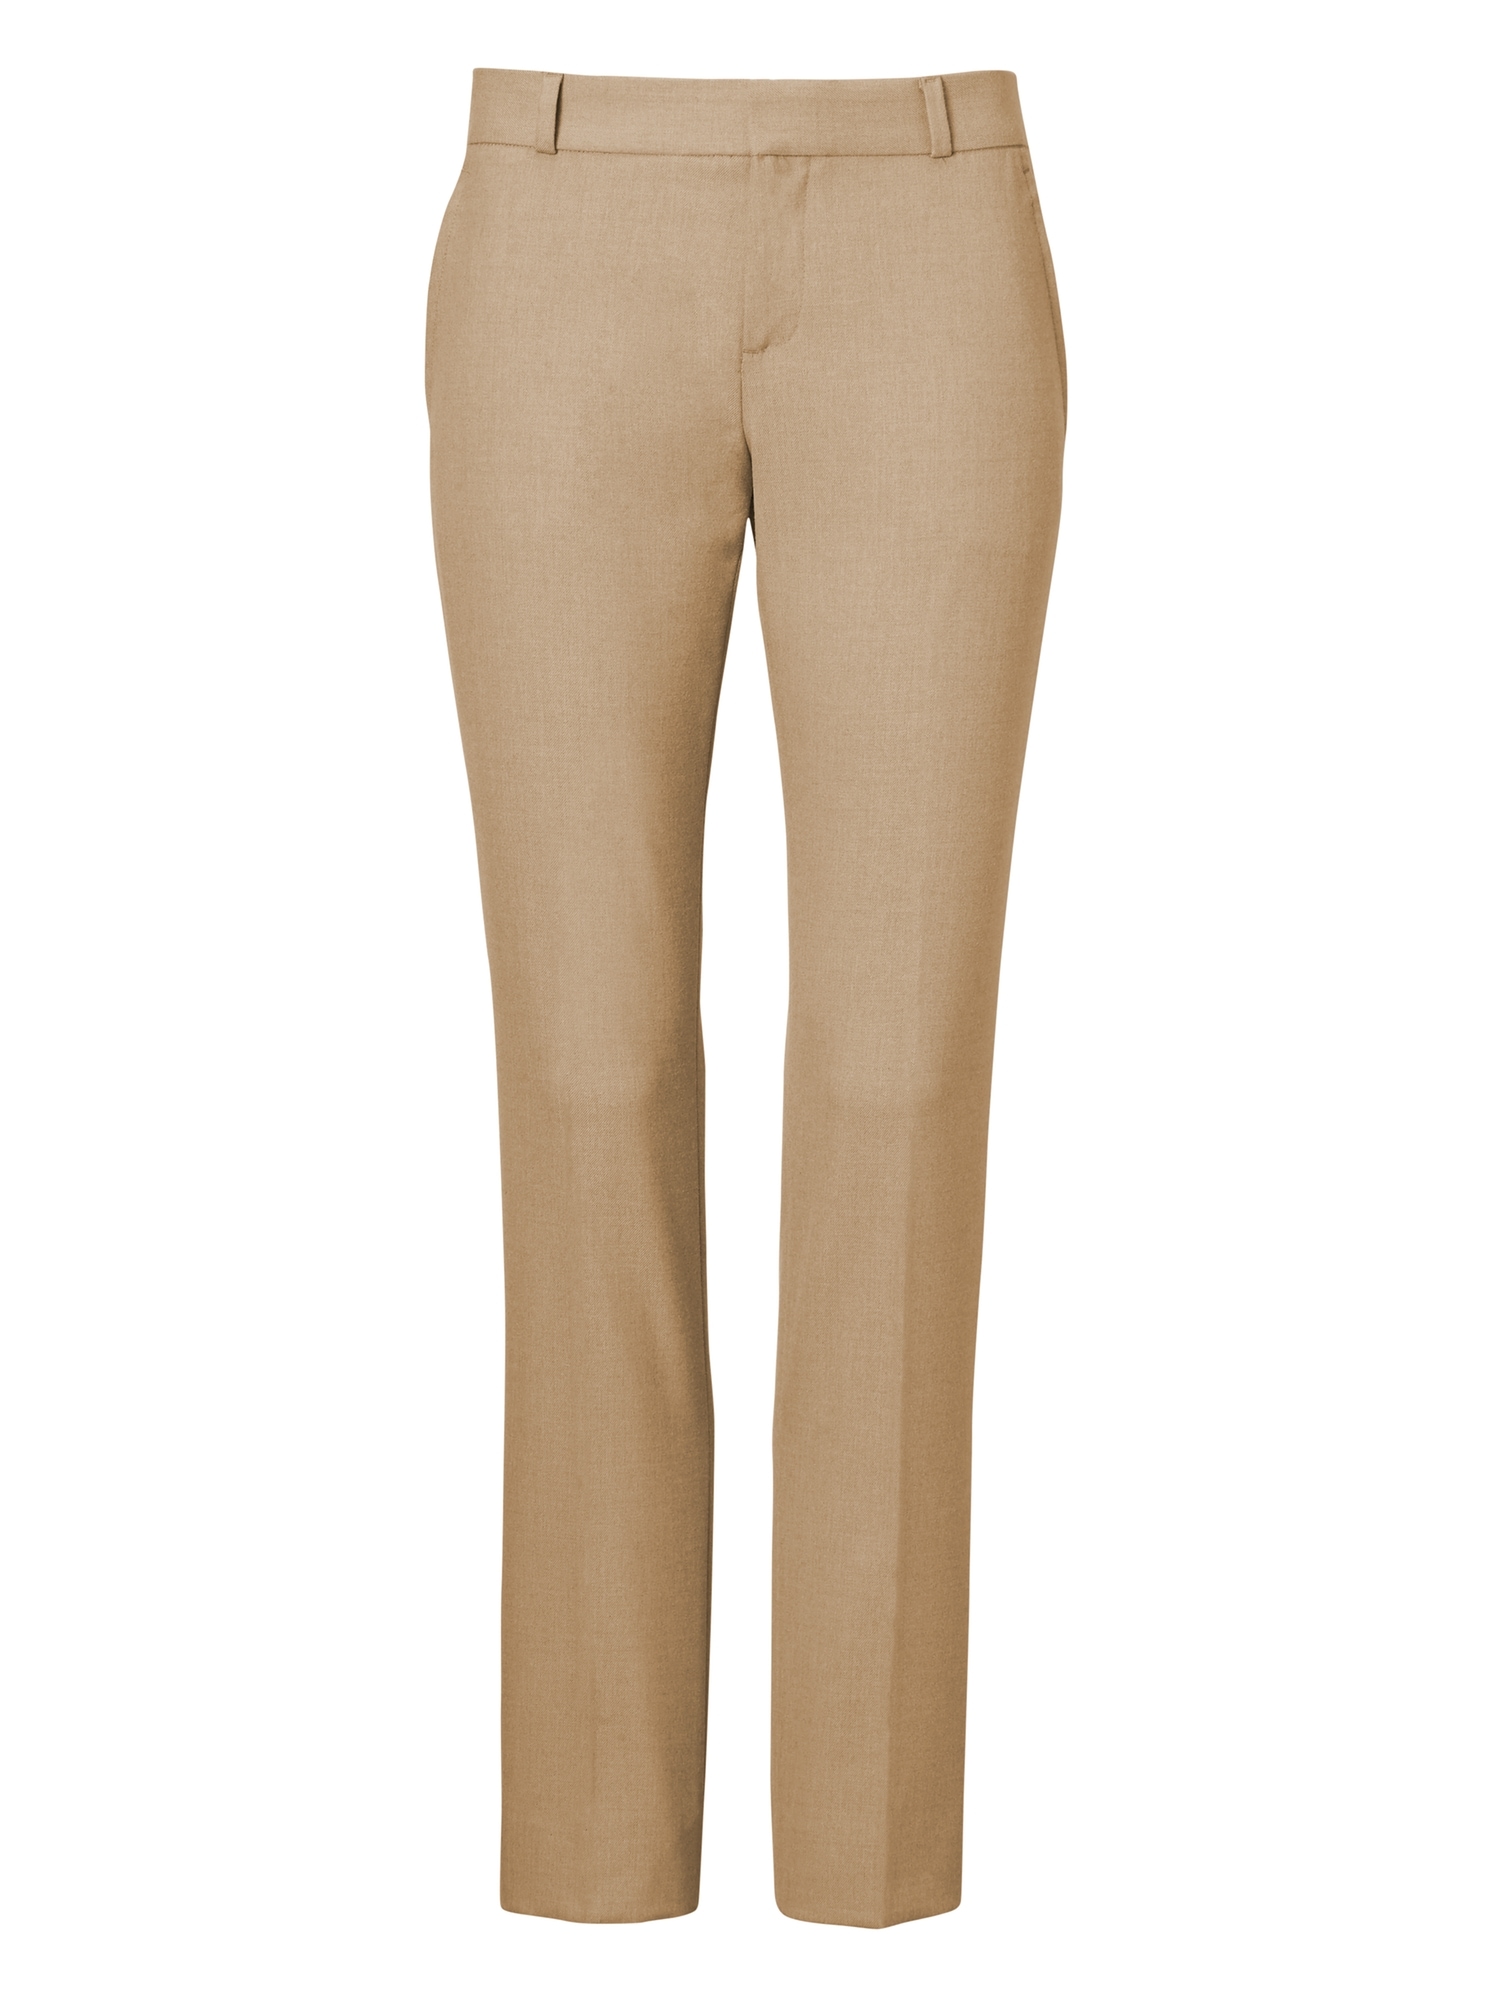 Ryan Slim Straight-Fit Luxe Brushed Twill Pant | Banana Republic